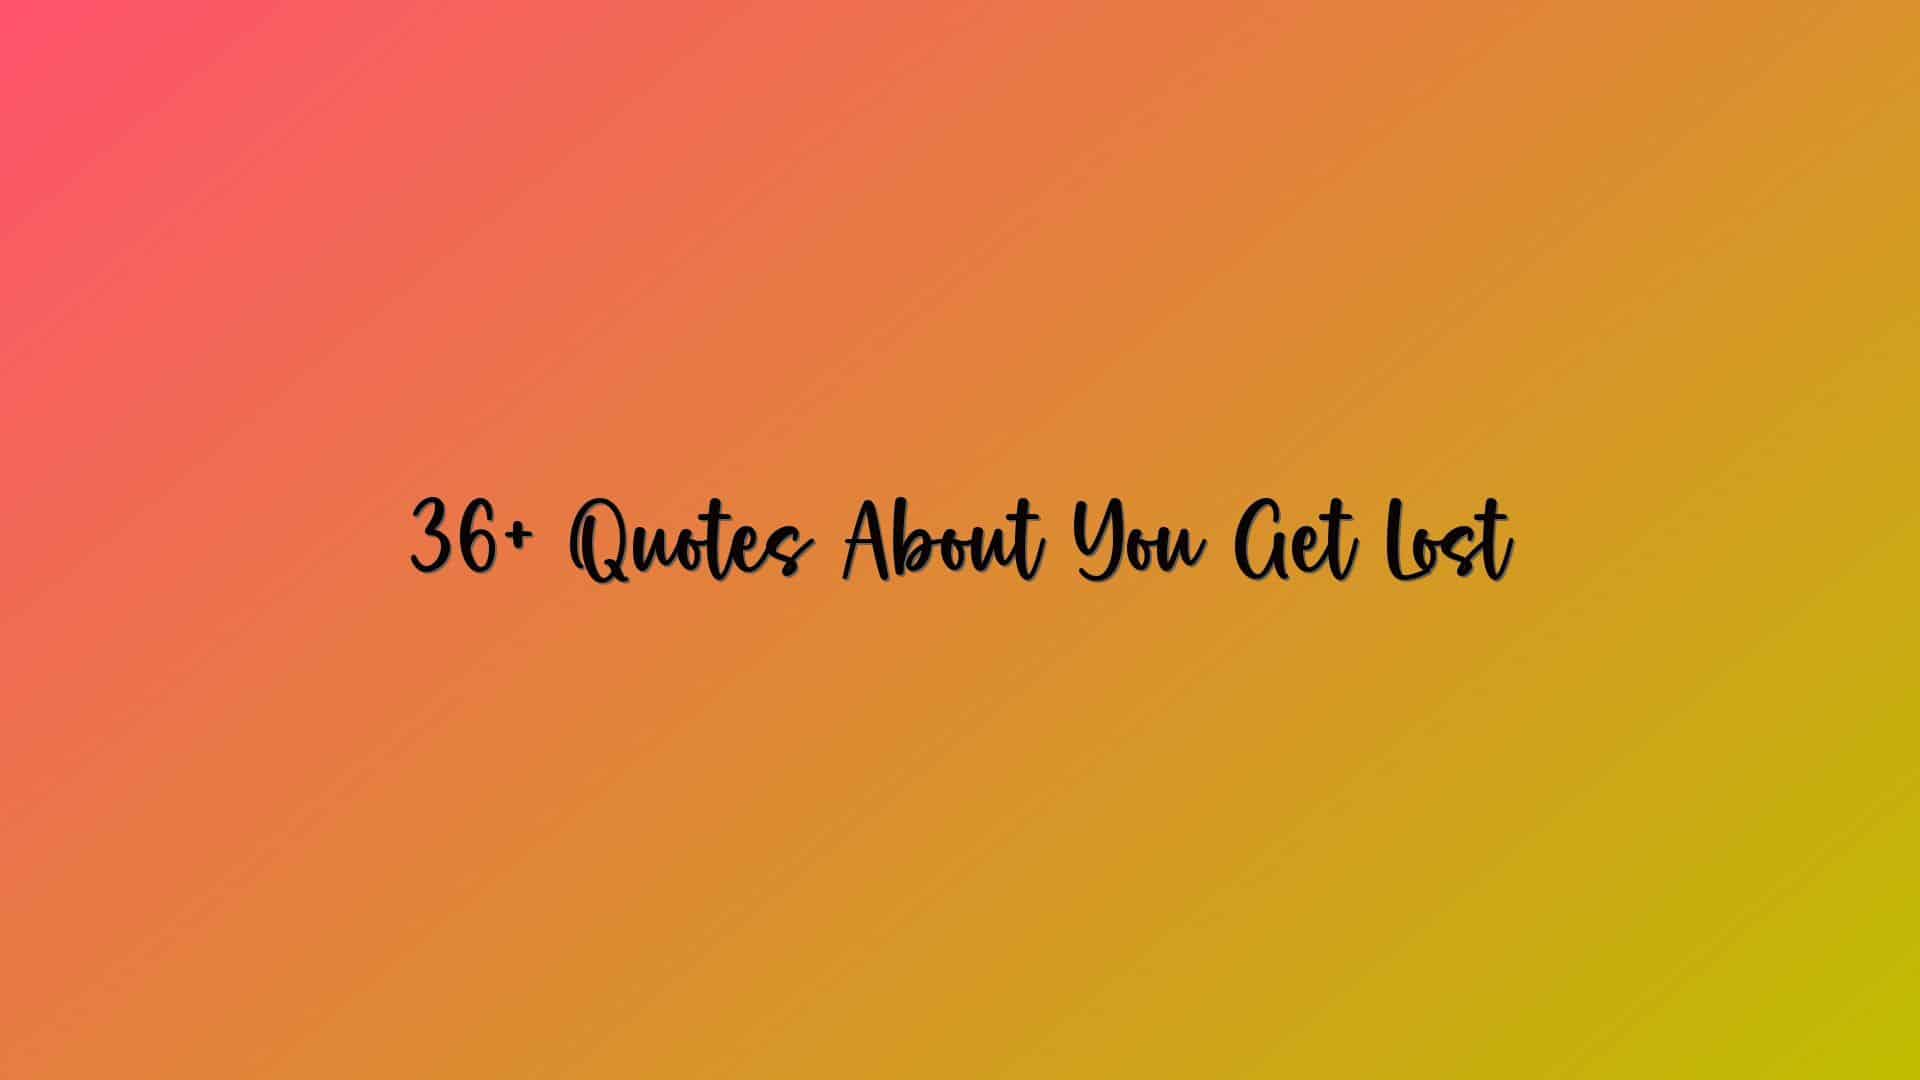 36+ Quotes About You Get Lost